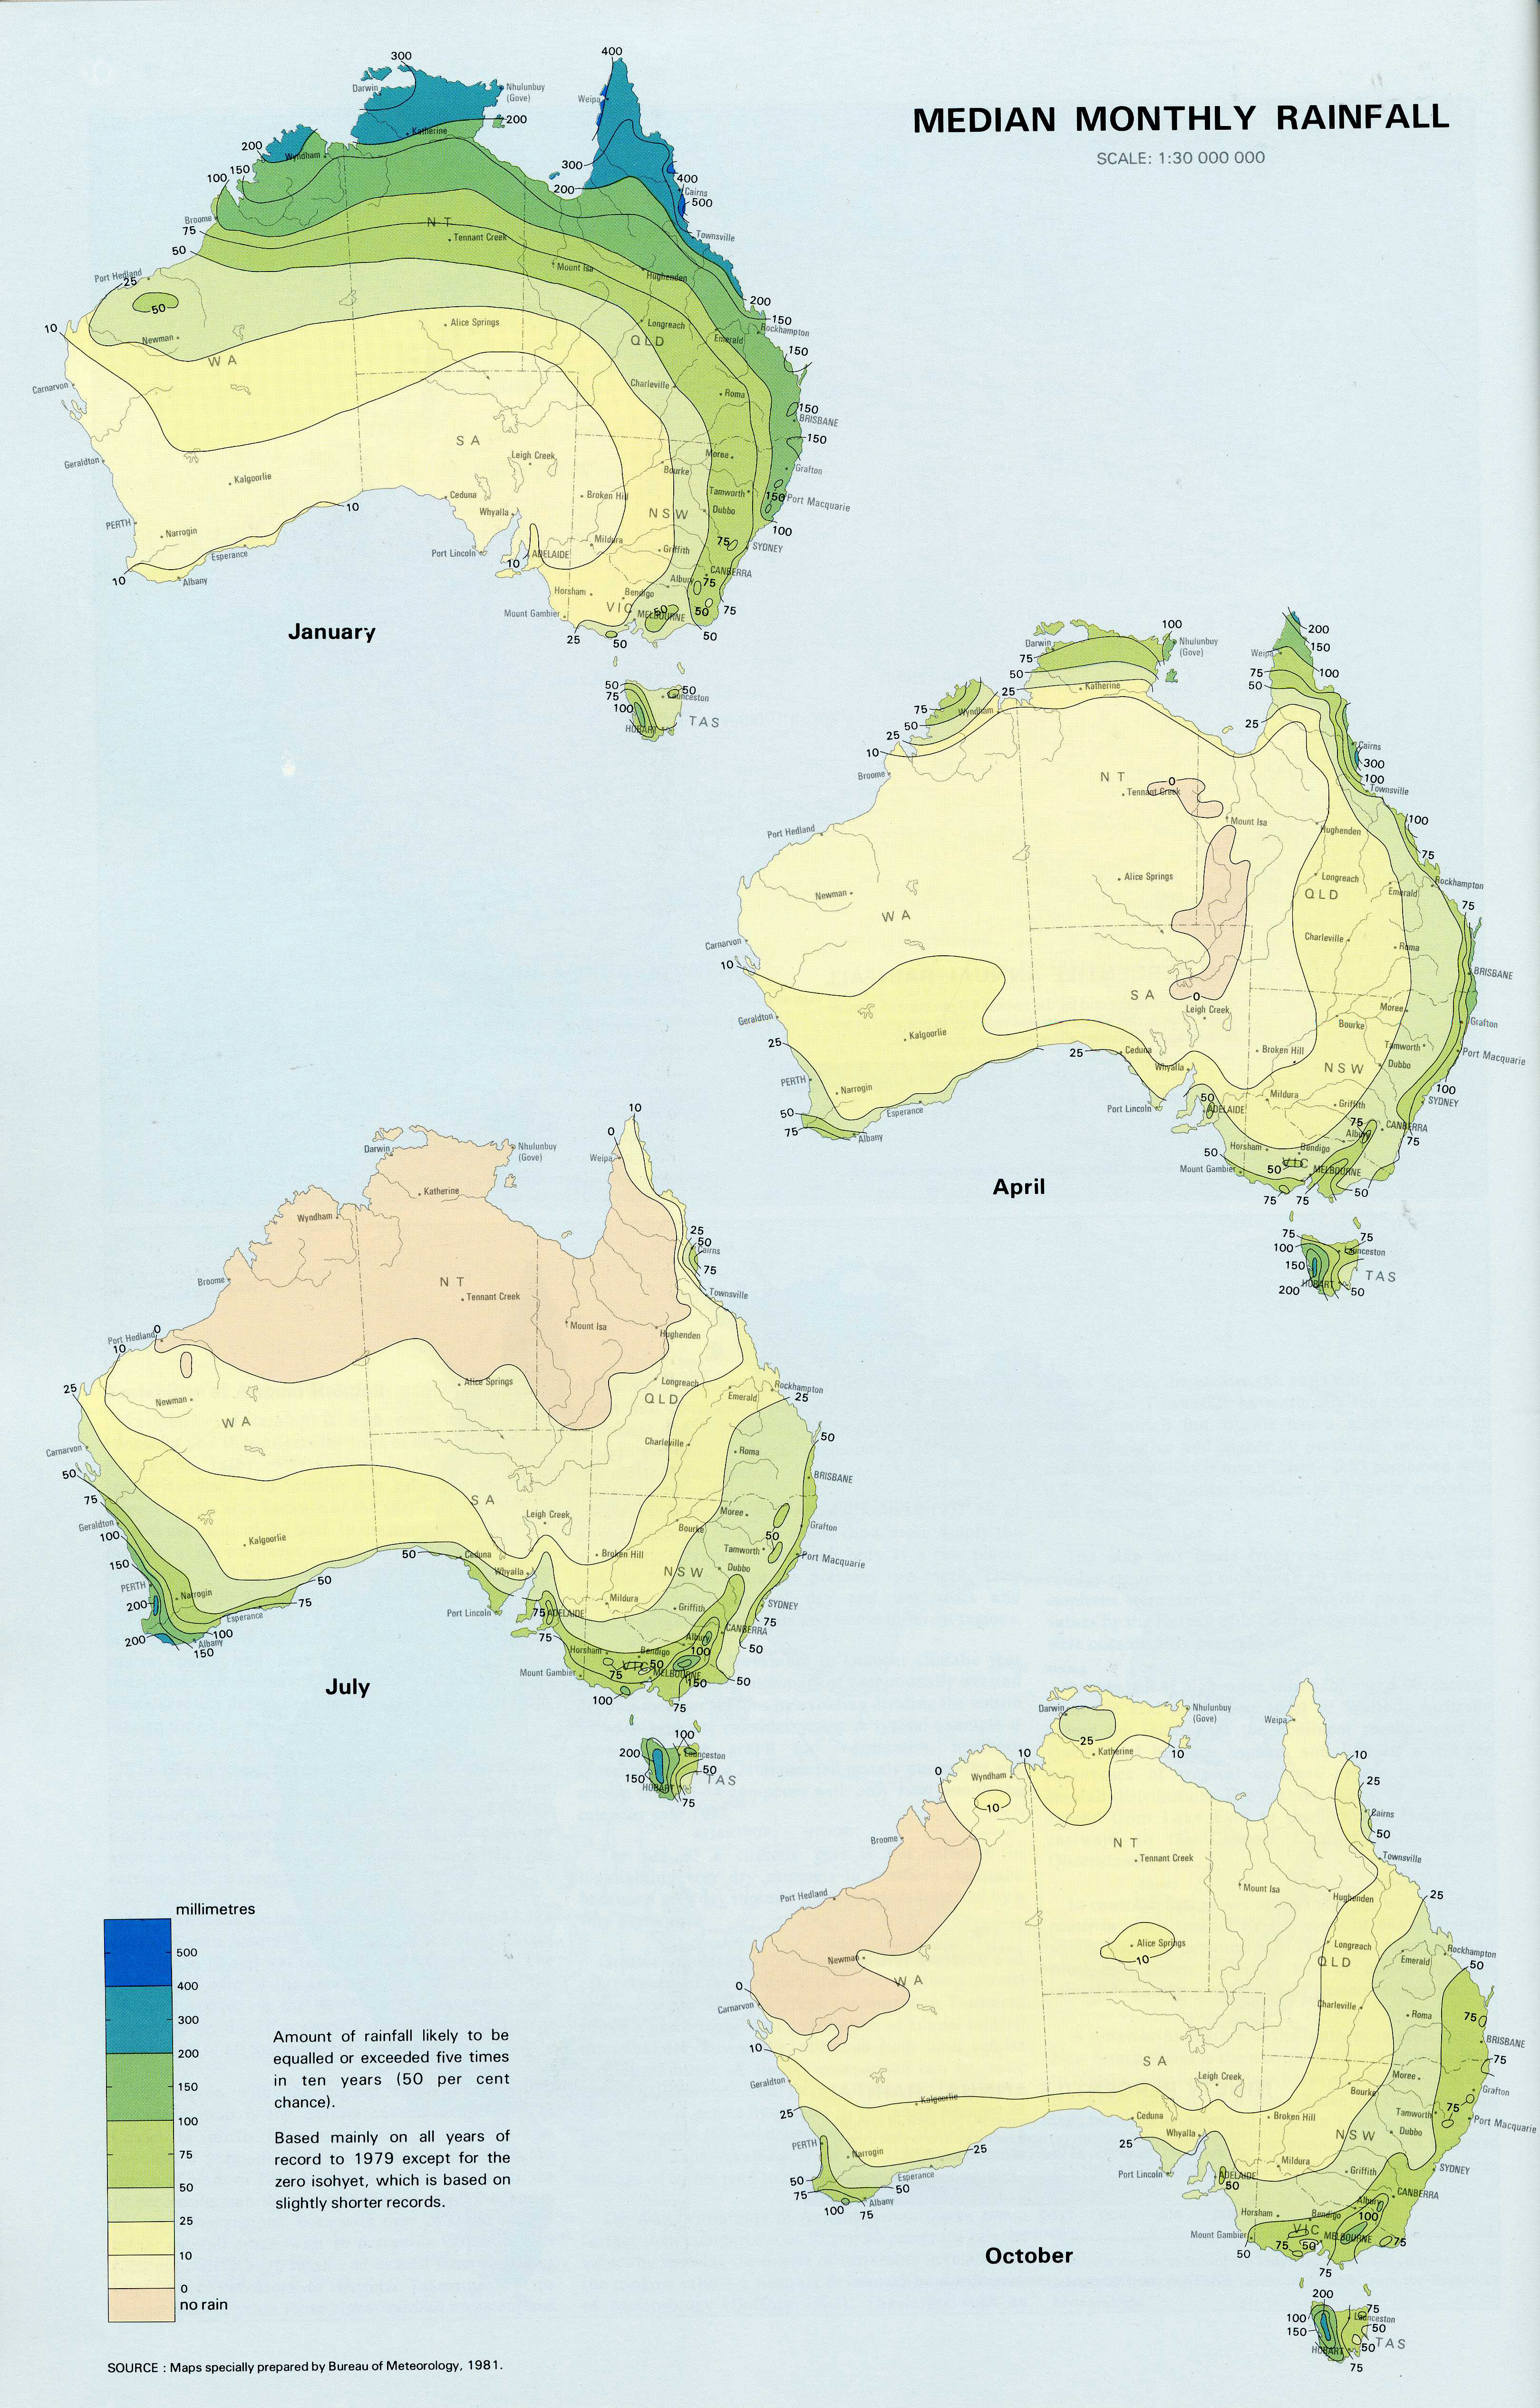 Time series map used for rainfall, shows 4 different maps of Australia, showing different rainfall for different months.